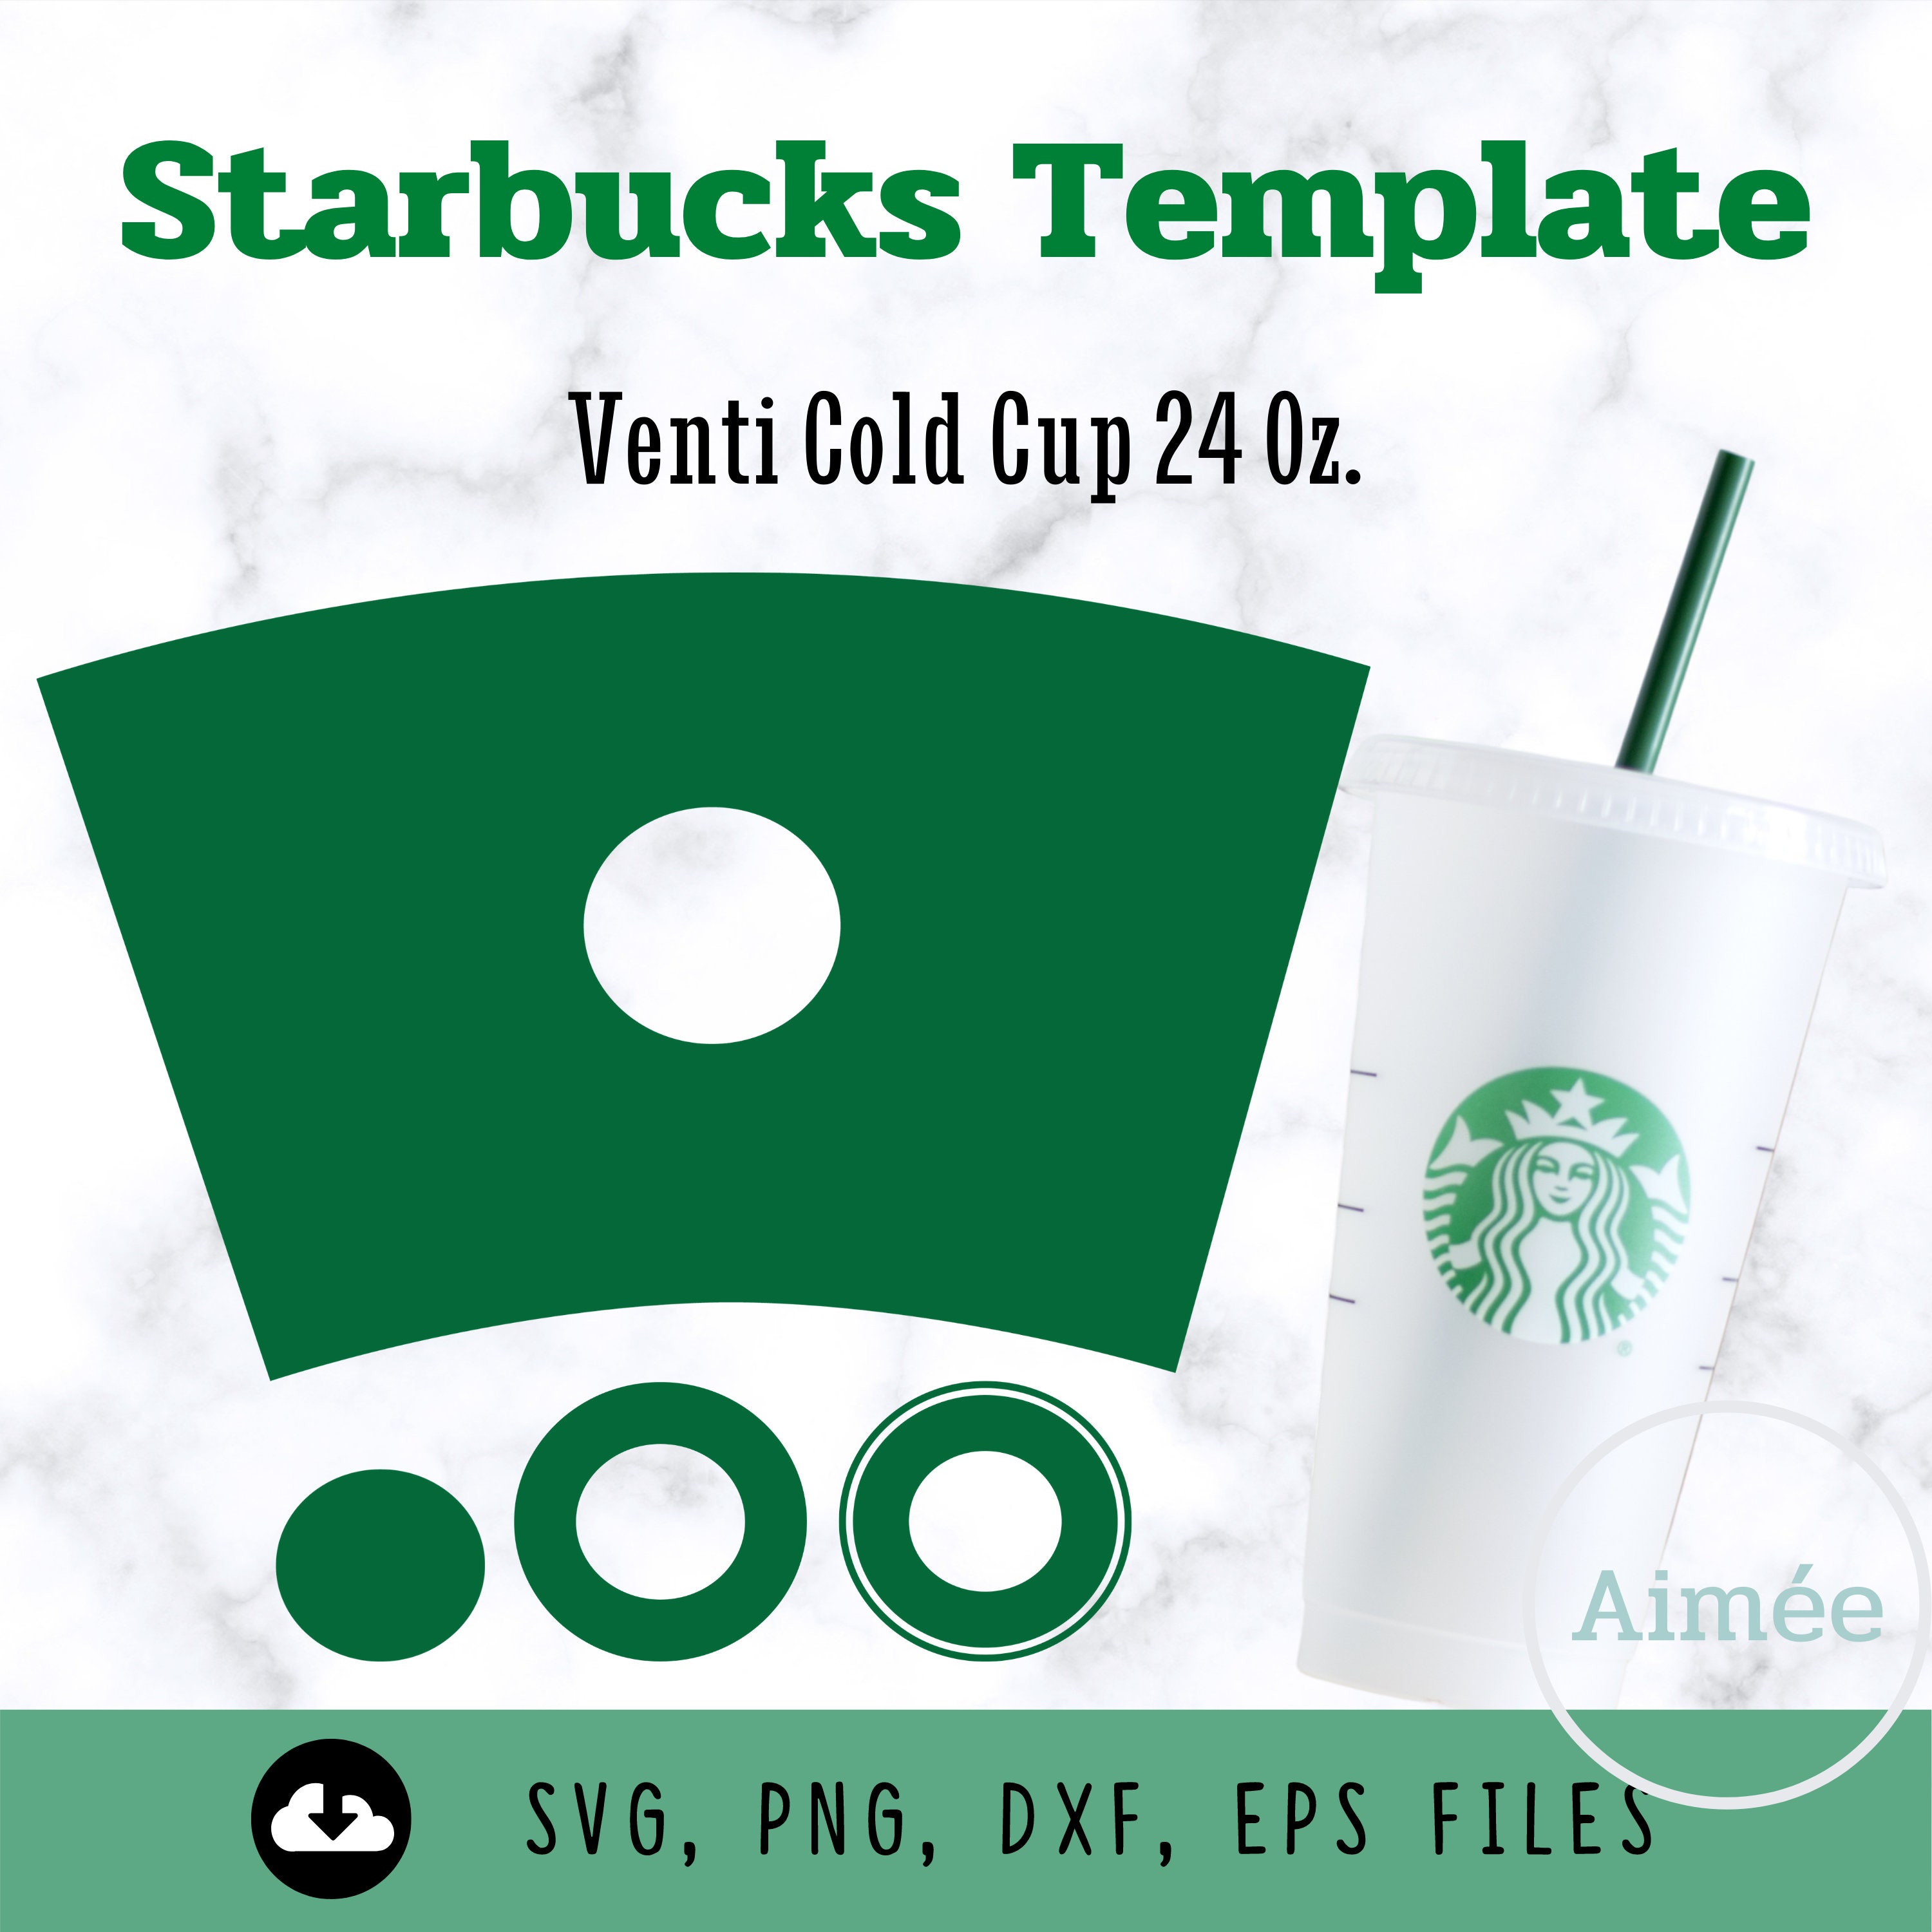 starbucks-full-wrap-template-reusable-venti-cold-cup-24-oz-etsy